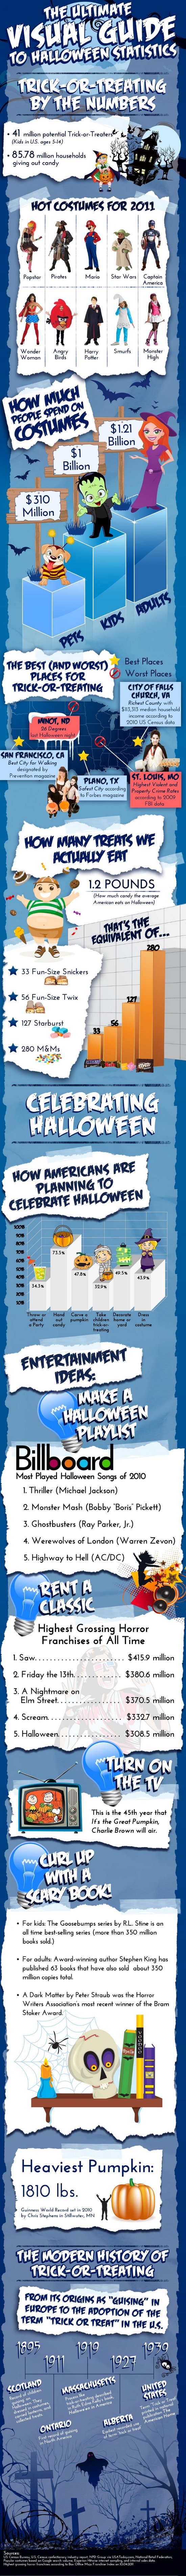 infographic-halloween-guide